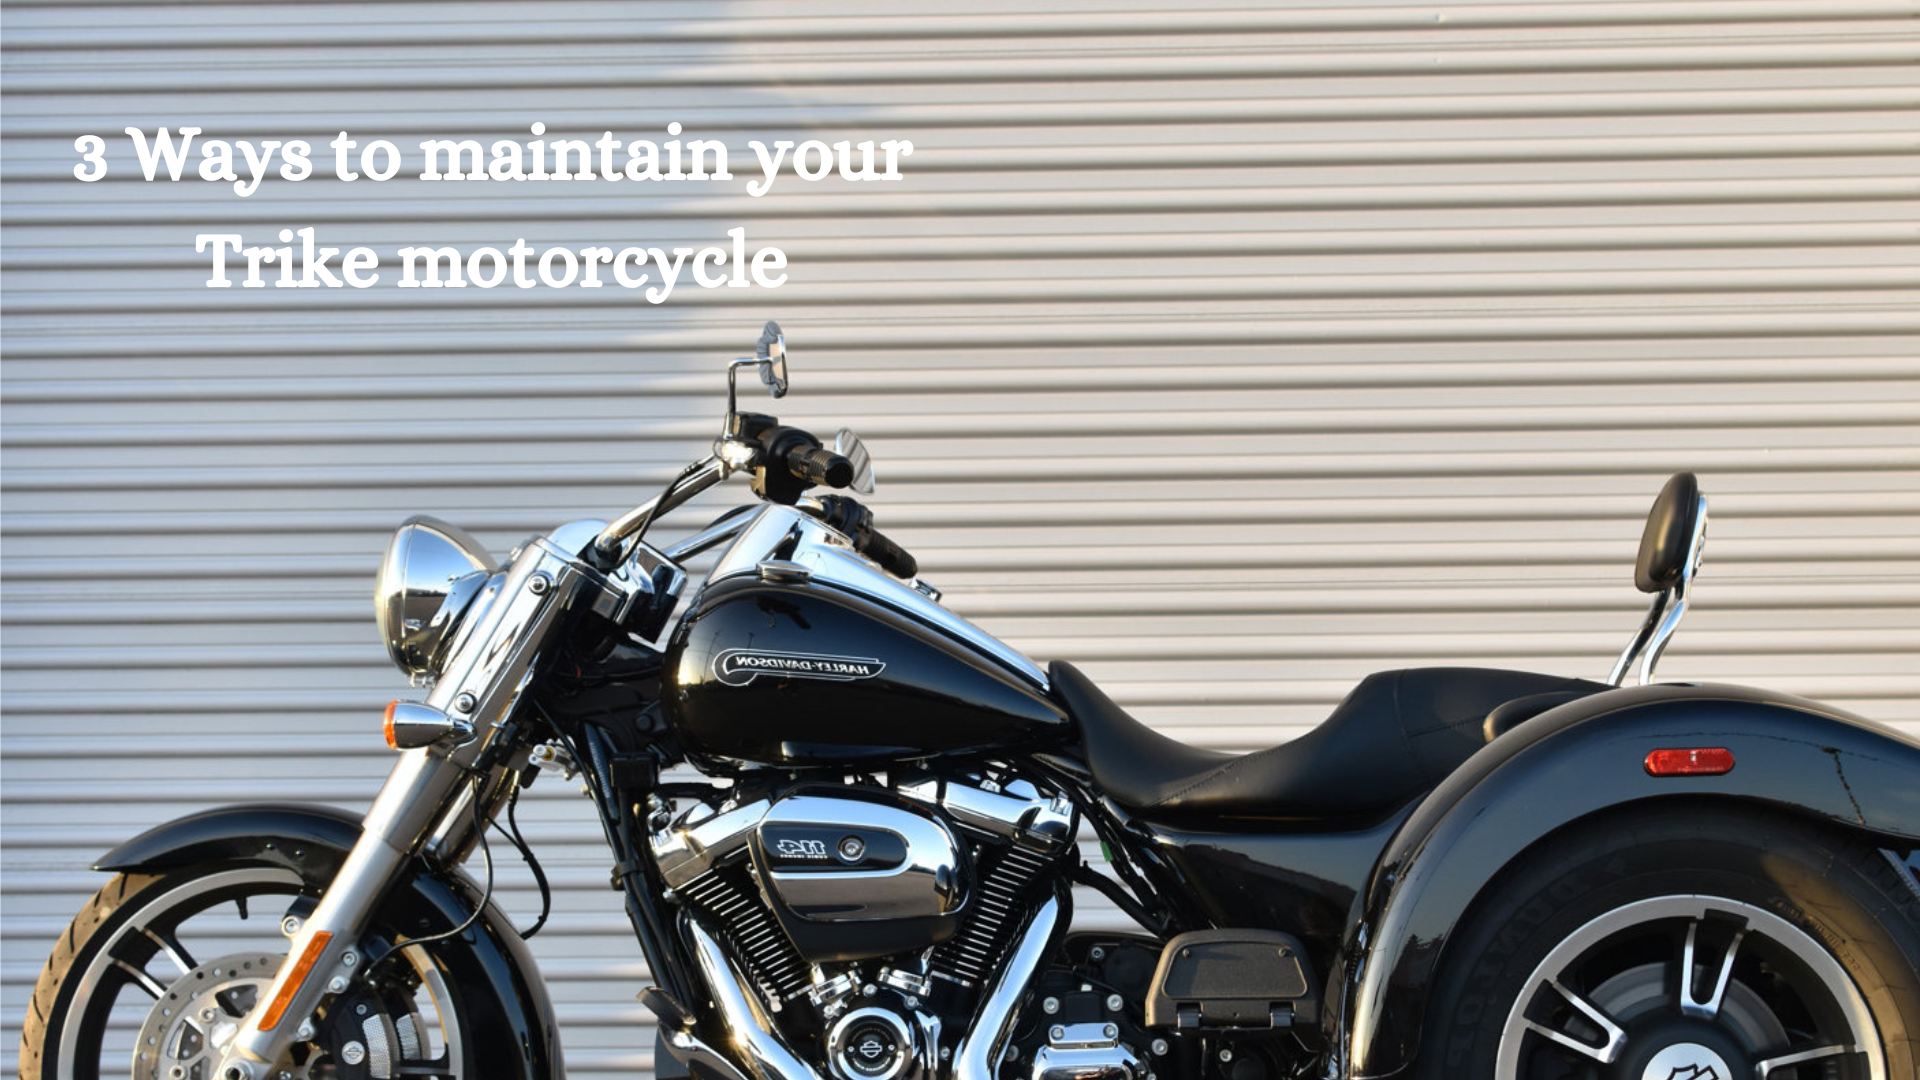 3 Ways to maintain your Trike motorcycle.